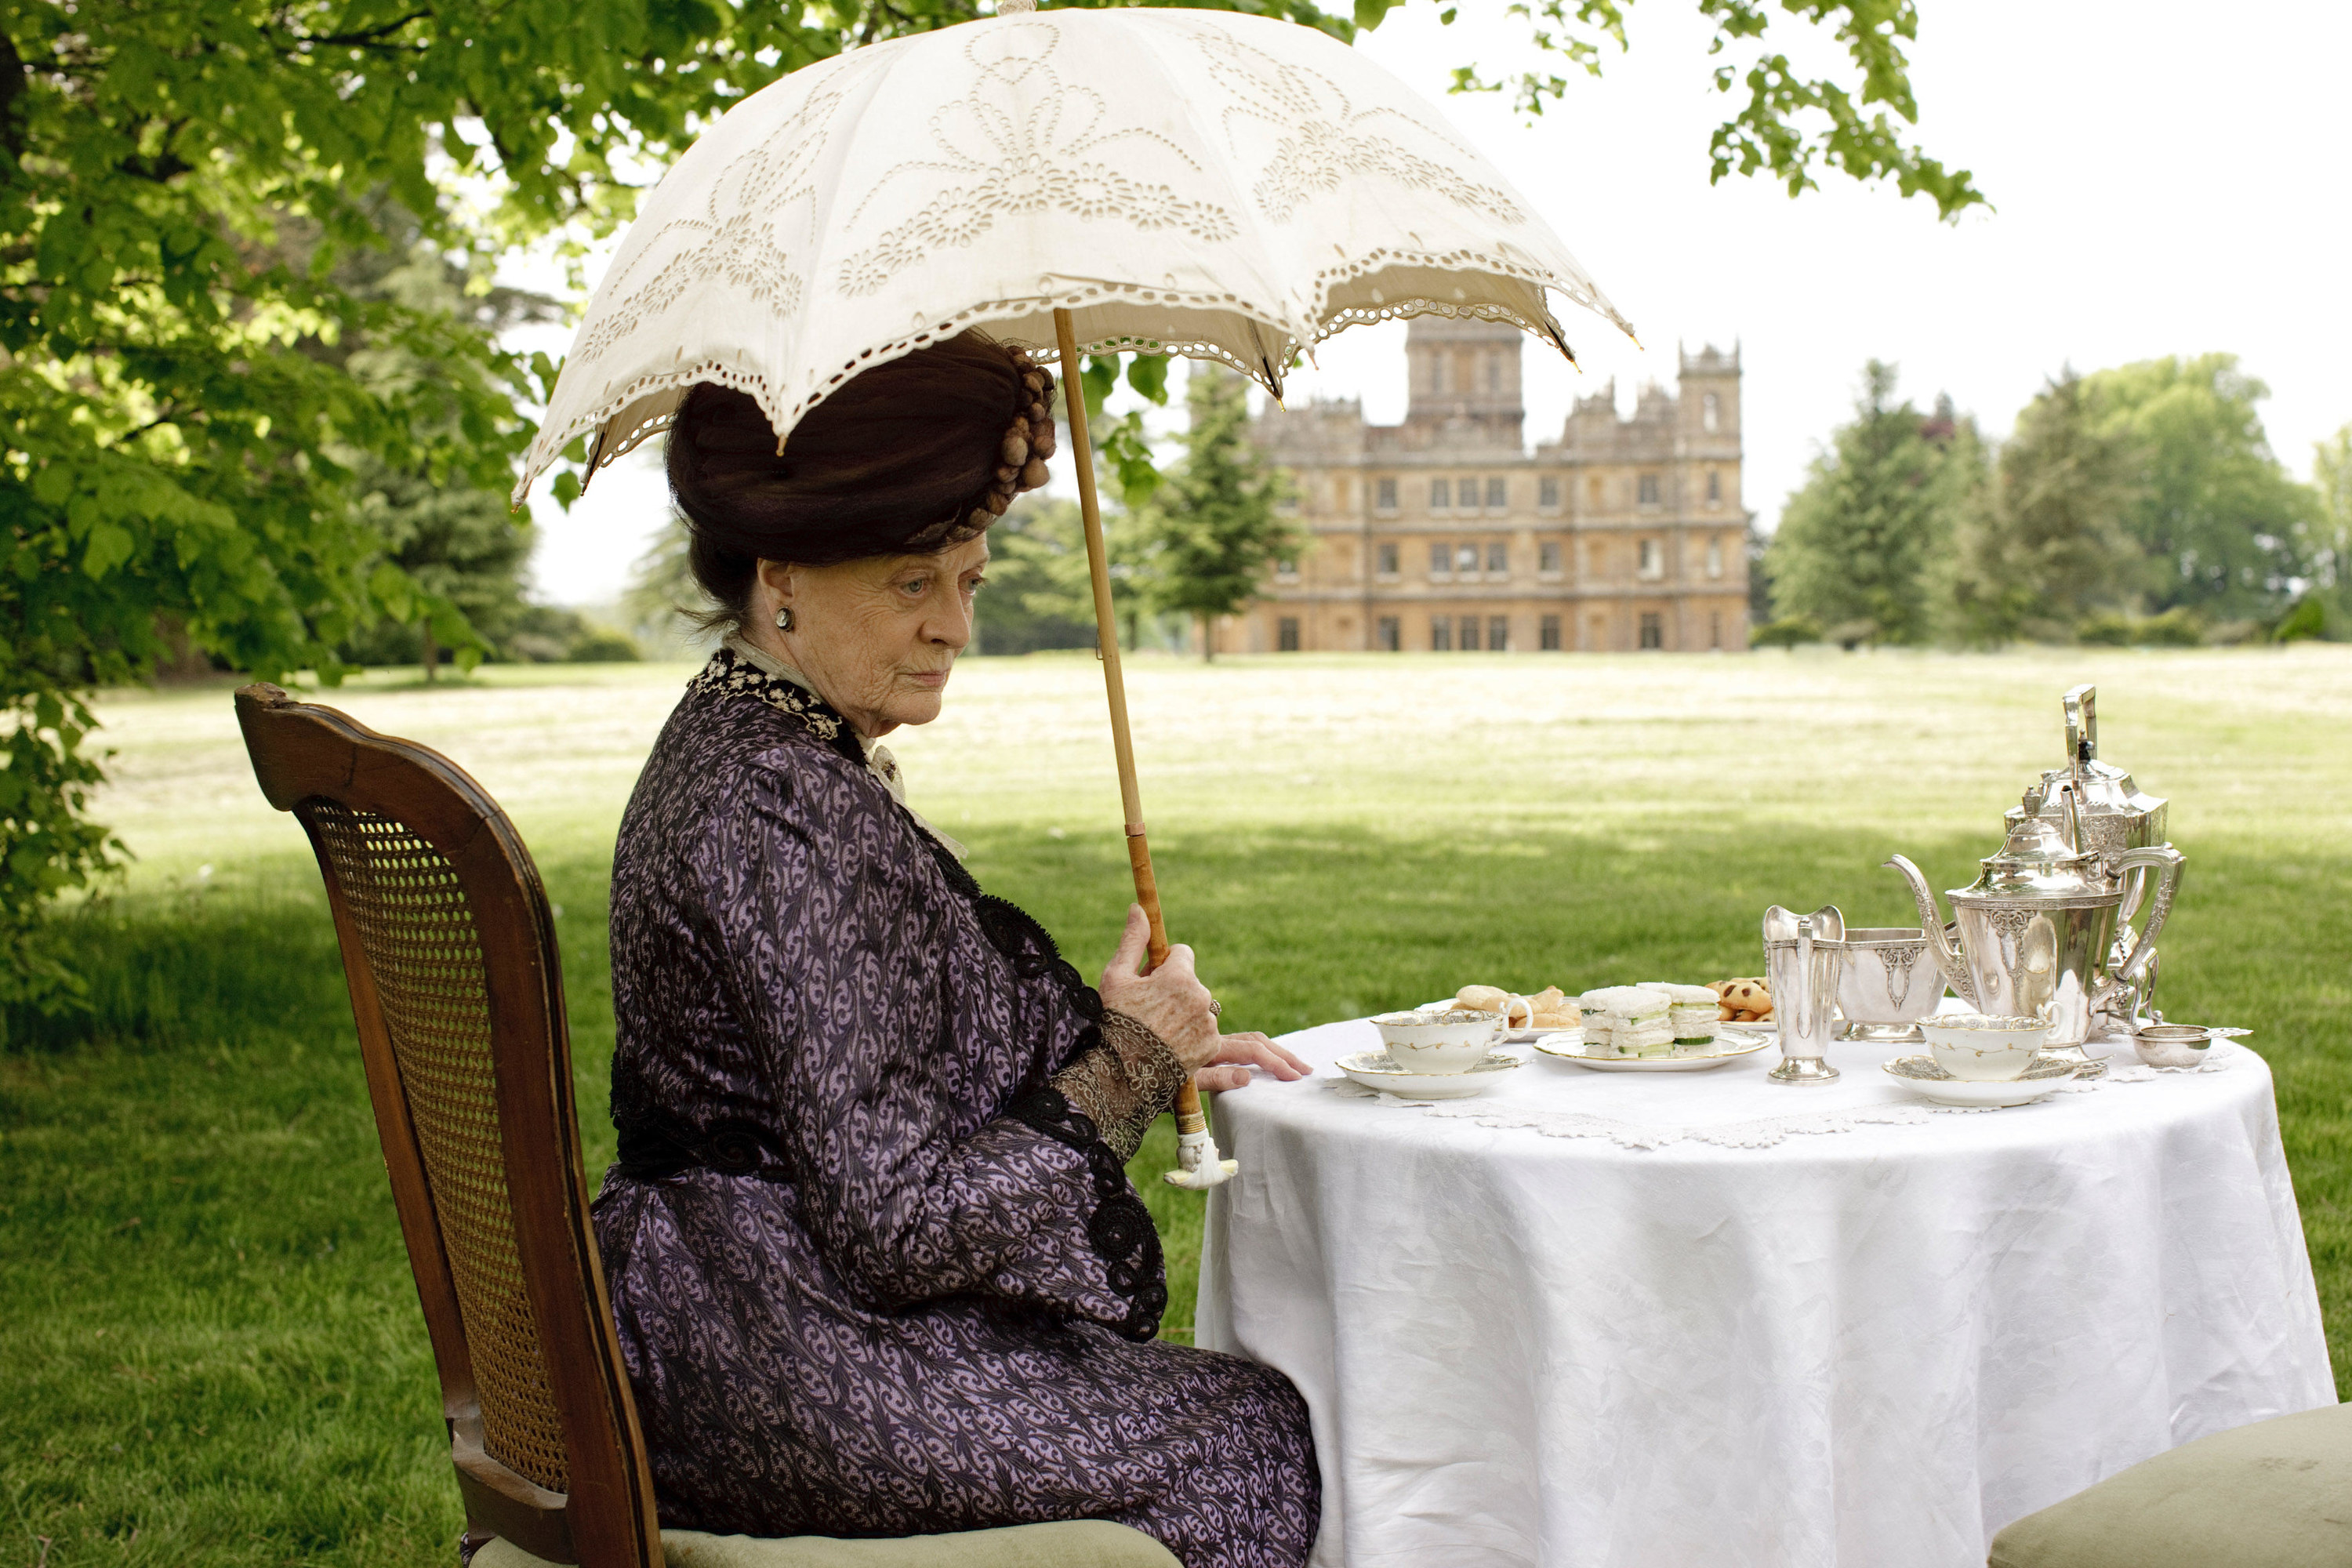 An old woman has lunch outside of a castle estate